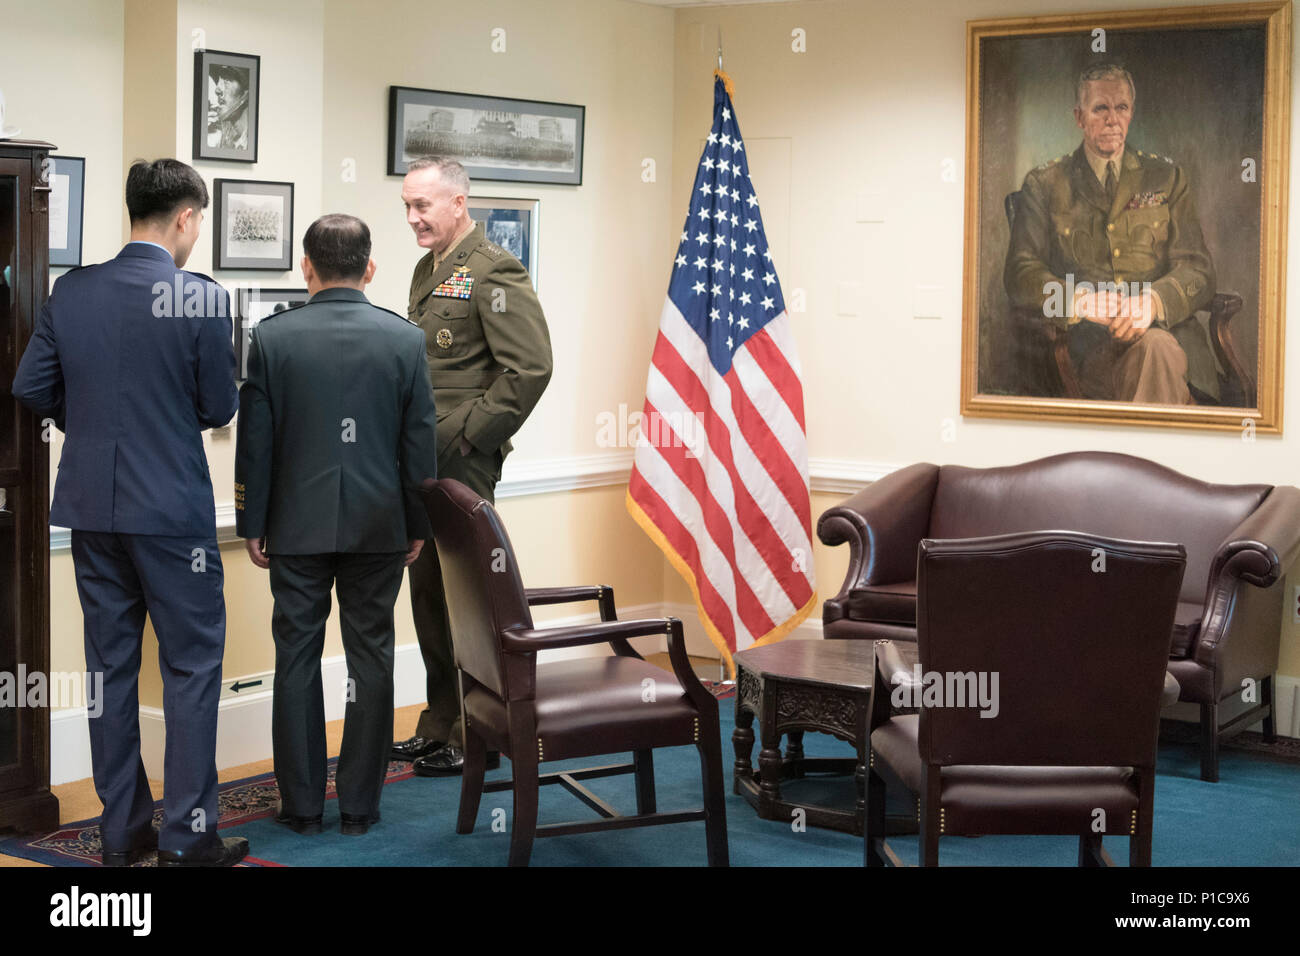 Chairman of the Joint Chiefs of Staff General Joseph F. Dunford hosted his Republic of Korea counterpart Gen. Lee Sun Jin for the 41st ROK-U.S. Military Committee Meeting at the Pentagon. Both senior military leaders strongly denounced North Korea's nuclear and missile provocations, stating they pose a serious threat to the Korean Peninsula, to the region, and to global peace and stability. (DoD Photos by Navy Petty Officer 2nd Class Dominique A. Pineiro) Stock Photo